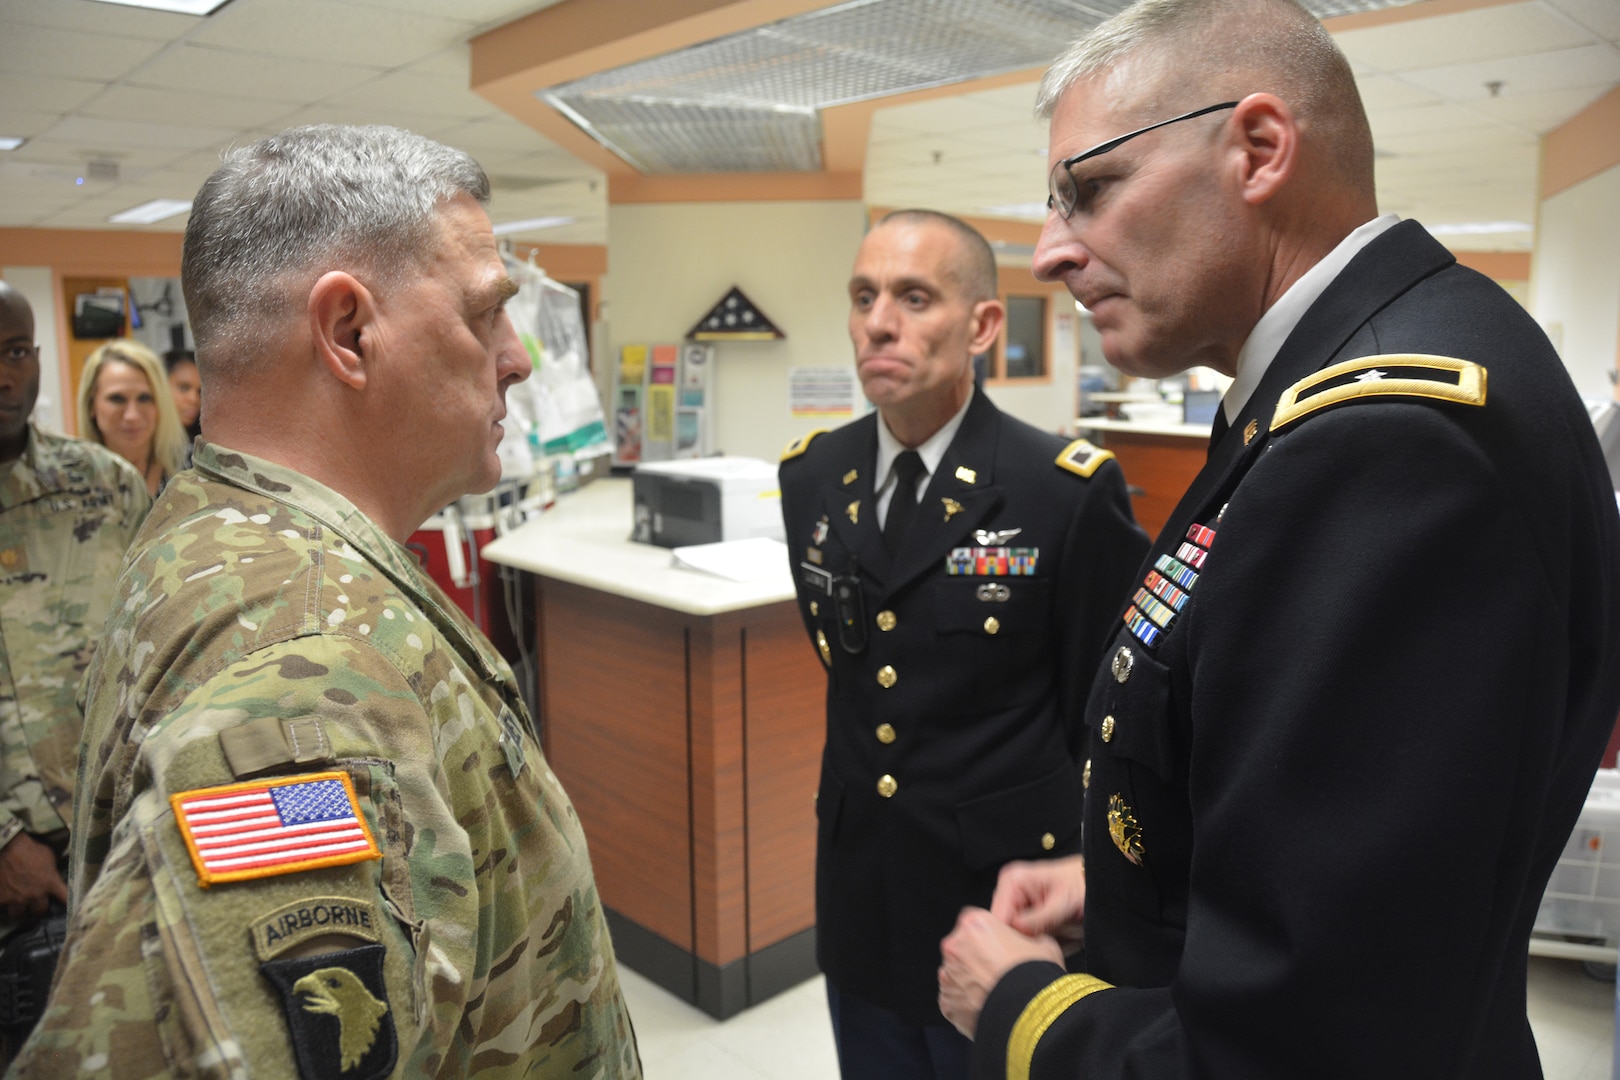 Brooke Army Medical Center Commanding General Brig. Gen. Jeffrey Johnson (right) discusses the BAMC trauma mission with U.S. Army Chief of Staff Gen. Mark A. Milley Nov. 11, 2017 as Col. Michael Ludwig, deputy commander for Inpatient Services, looks on. Milley spent Veterans Day visiting with patients and staff at BAMC.